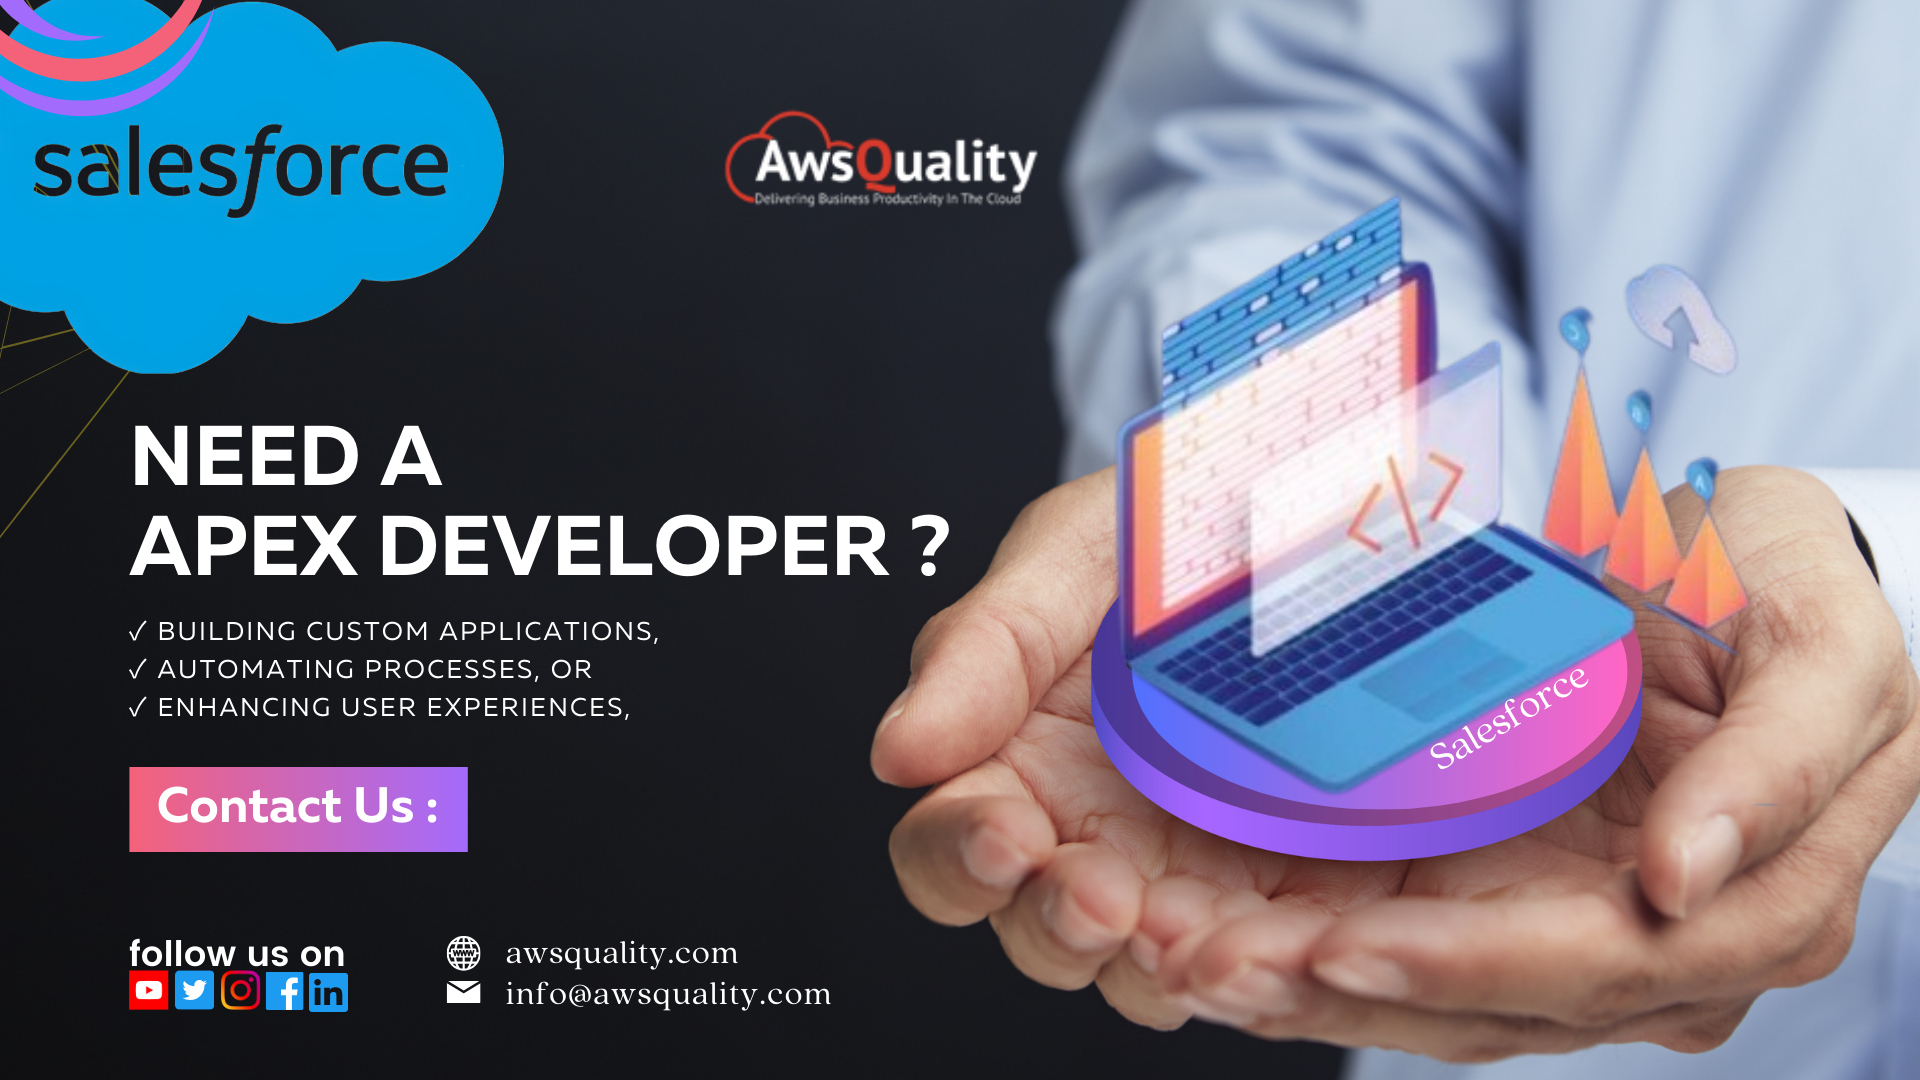 hire Apex developers for custom solutions